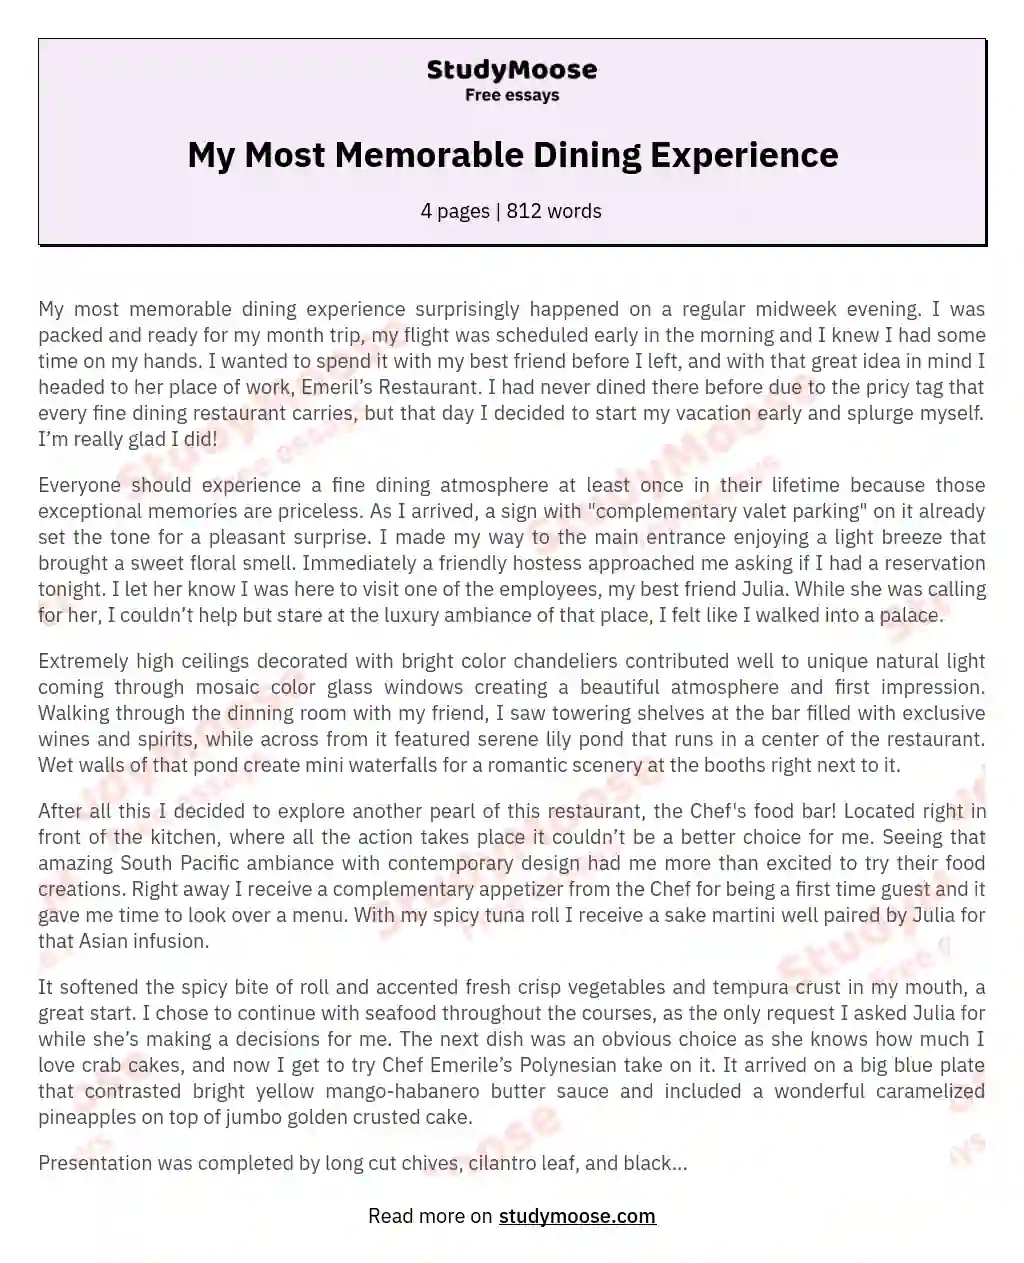 My Most Memorable Dining Experience essay